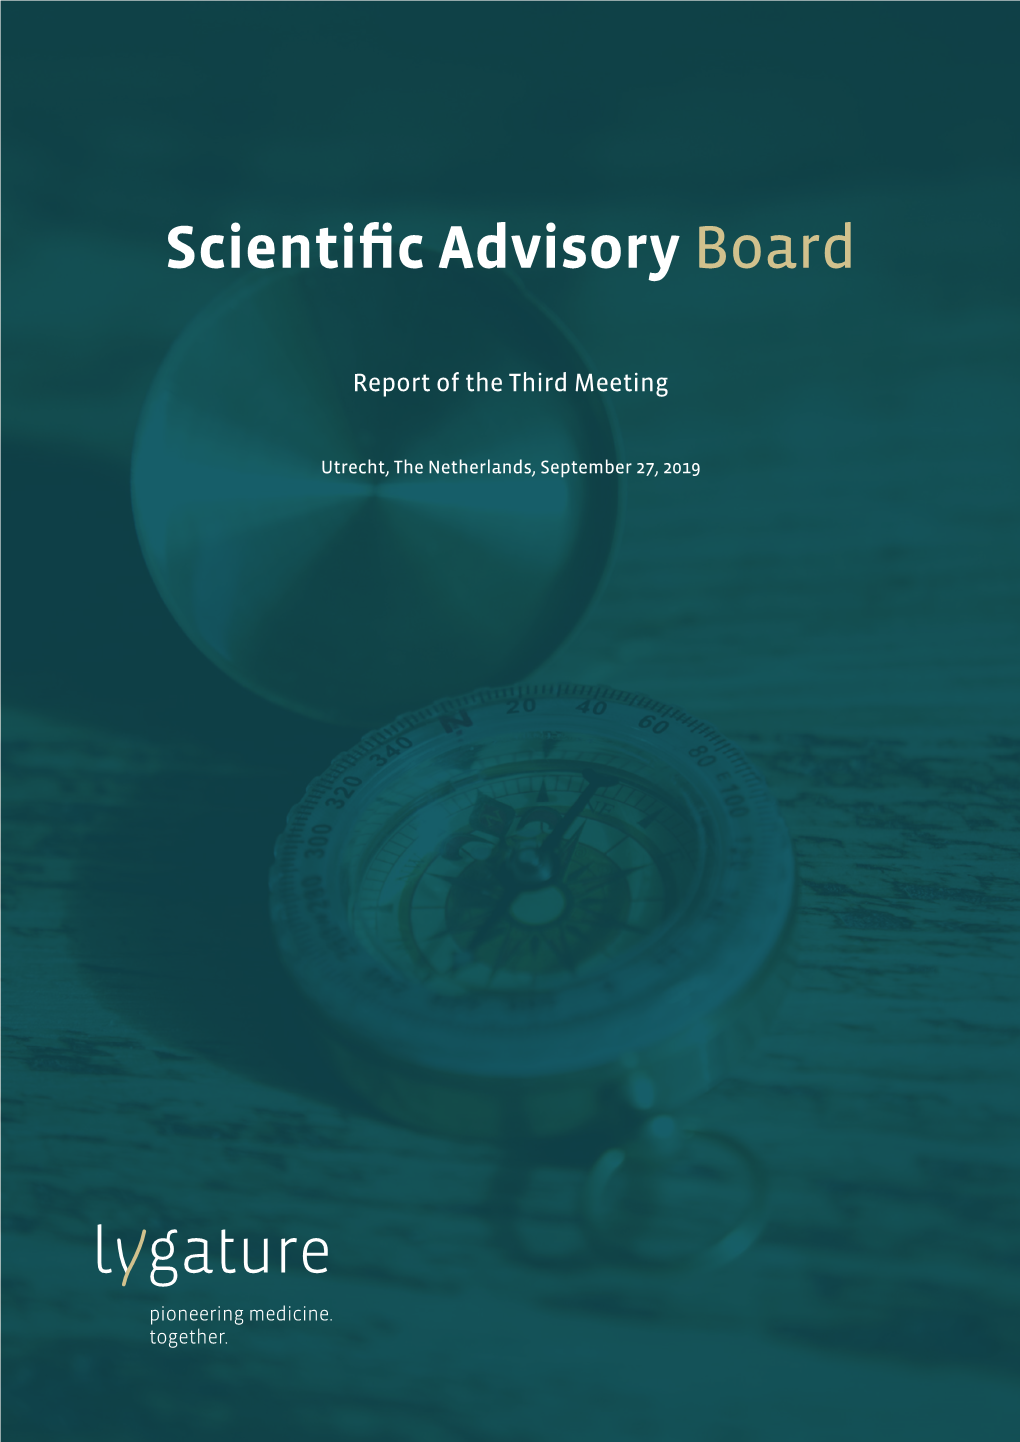 Lygature Scientific Advisory Board (SAB) and the Agenda of the Meeting (Page 2-3)